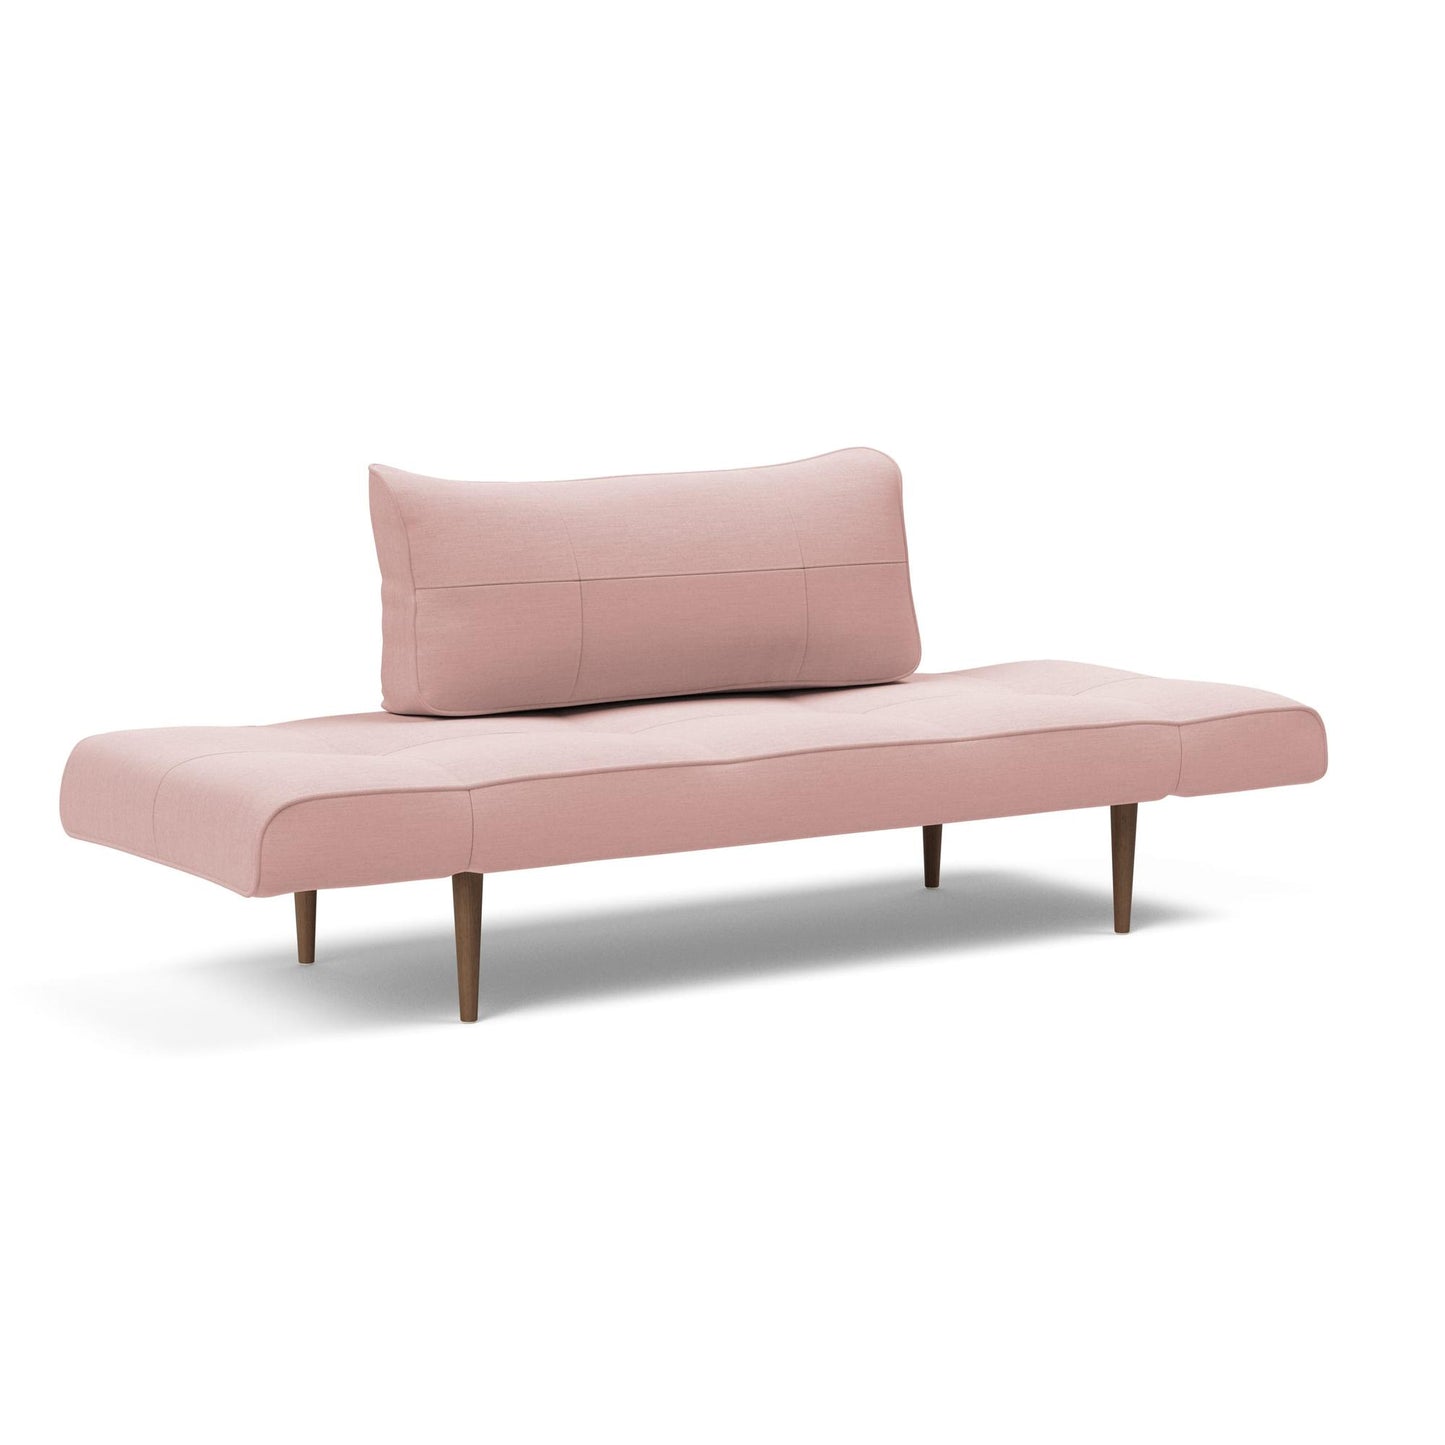 Zeal Deluxe Daybed Sofa Bed in Vivus Dusty Coral